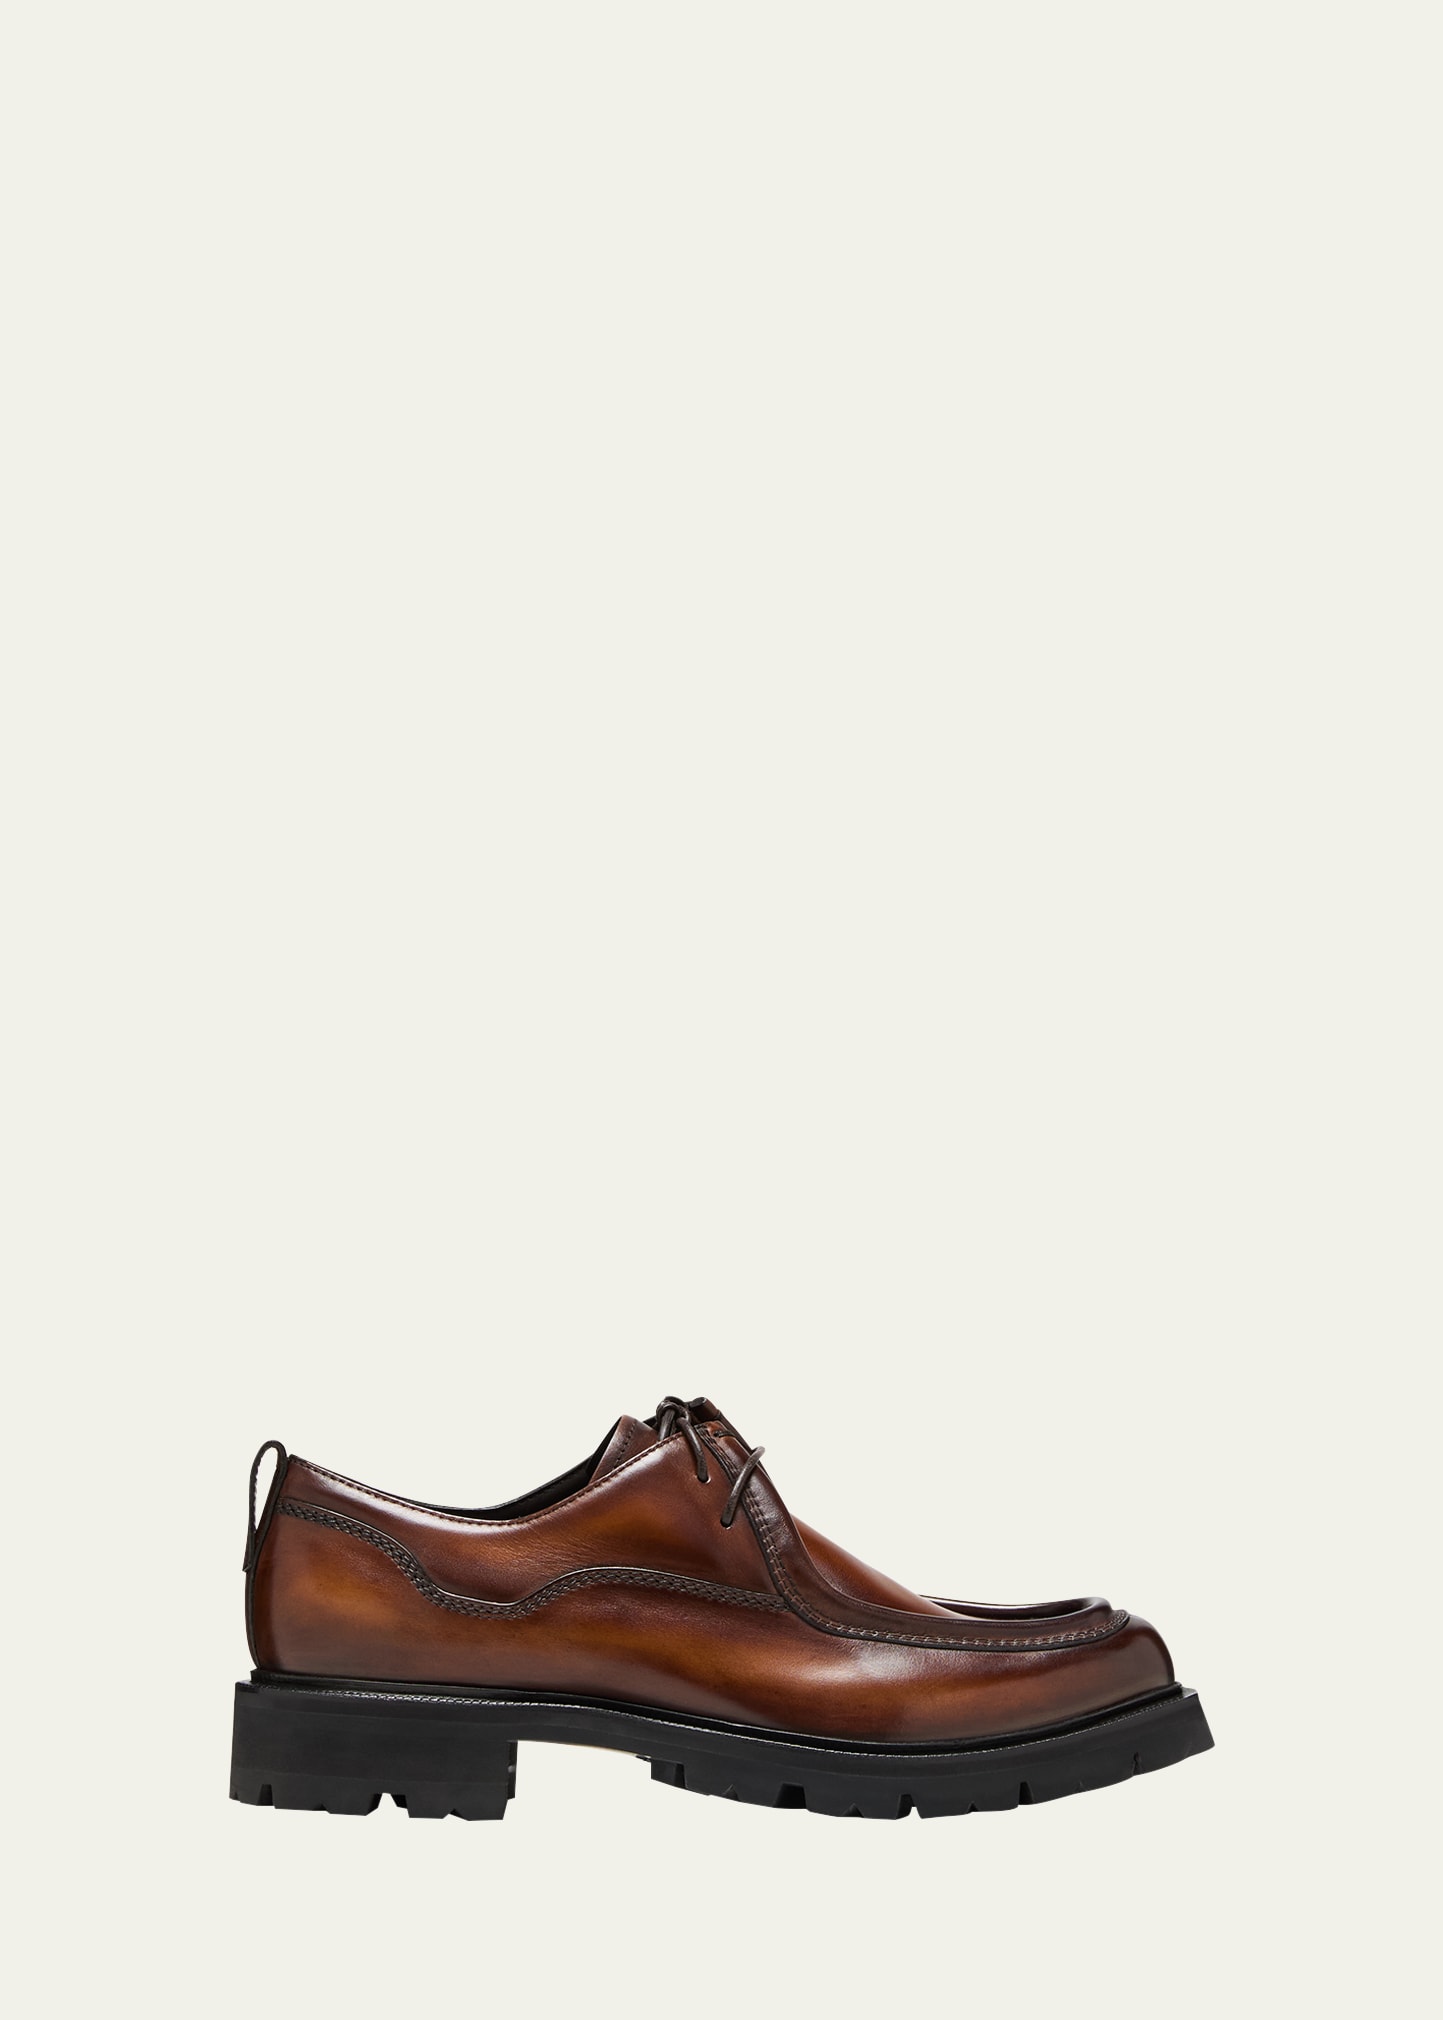 Berluti Men's Brunico Lug Sole Leather Derby Shoes In Intense Cacao